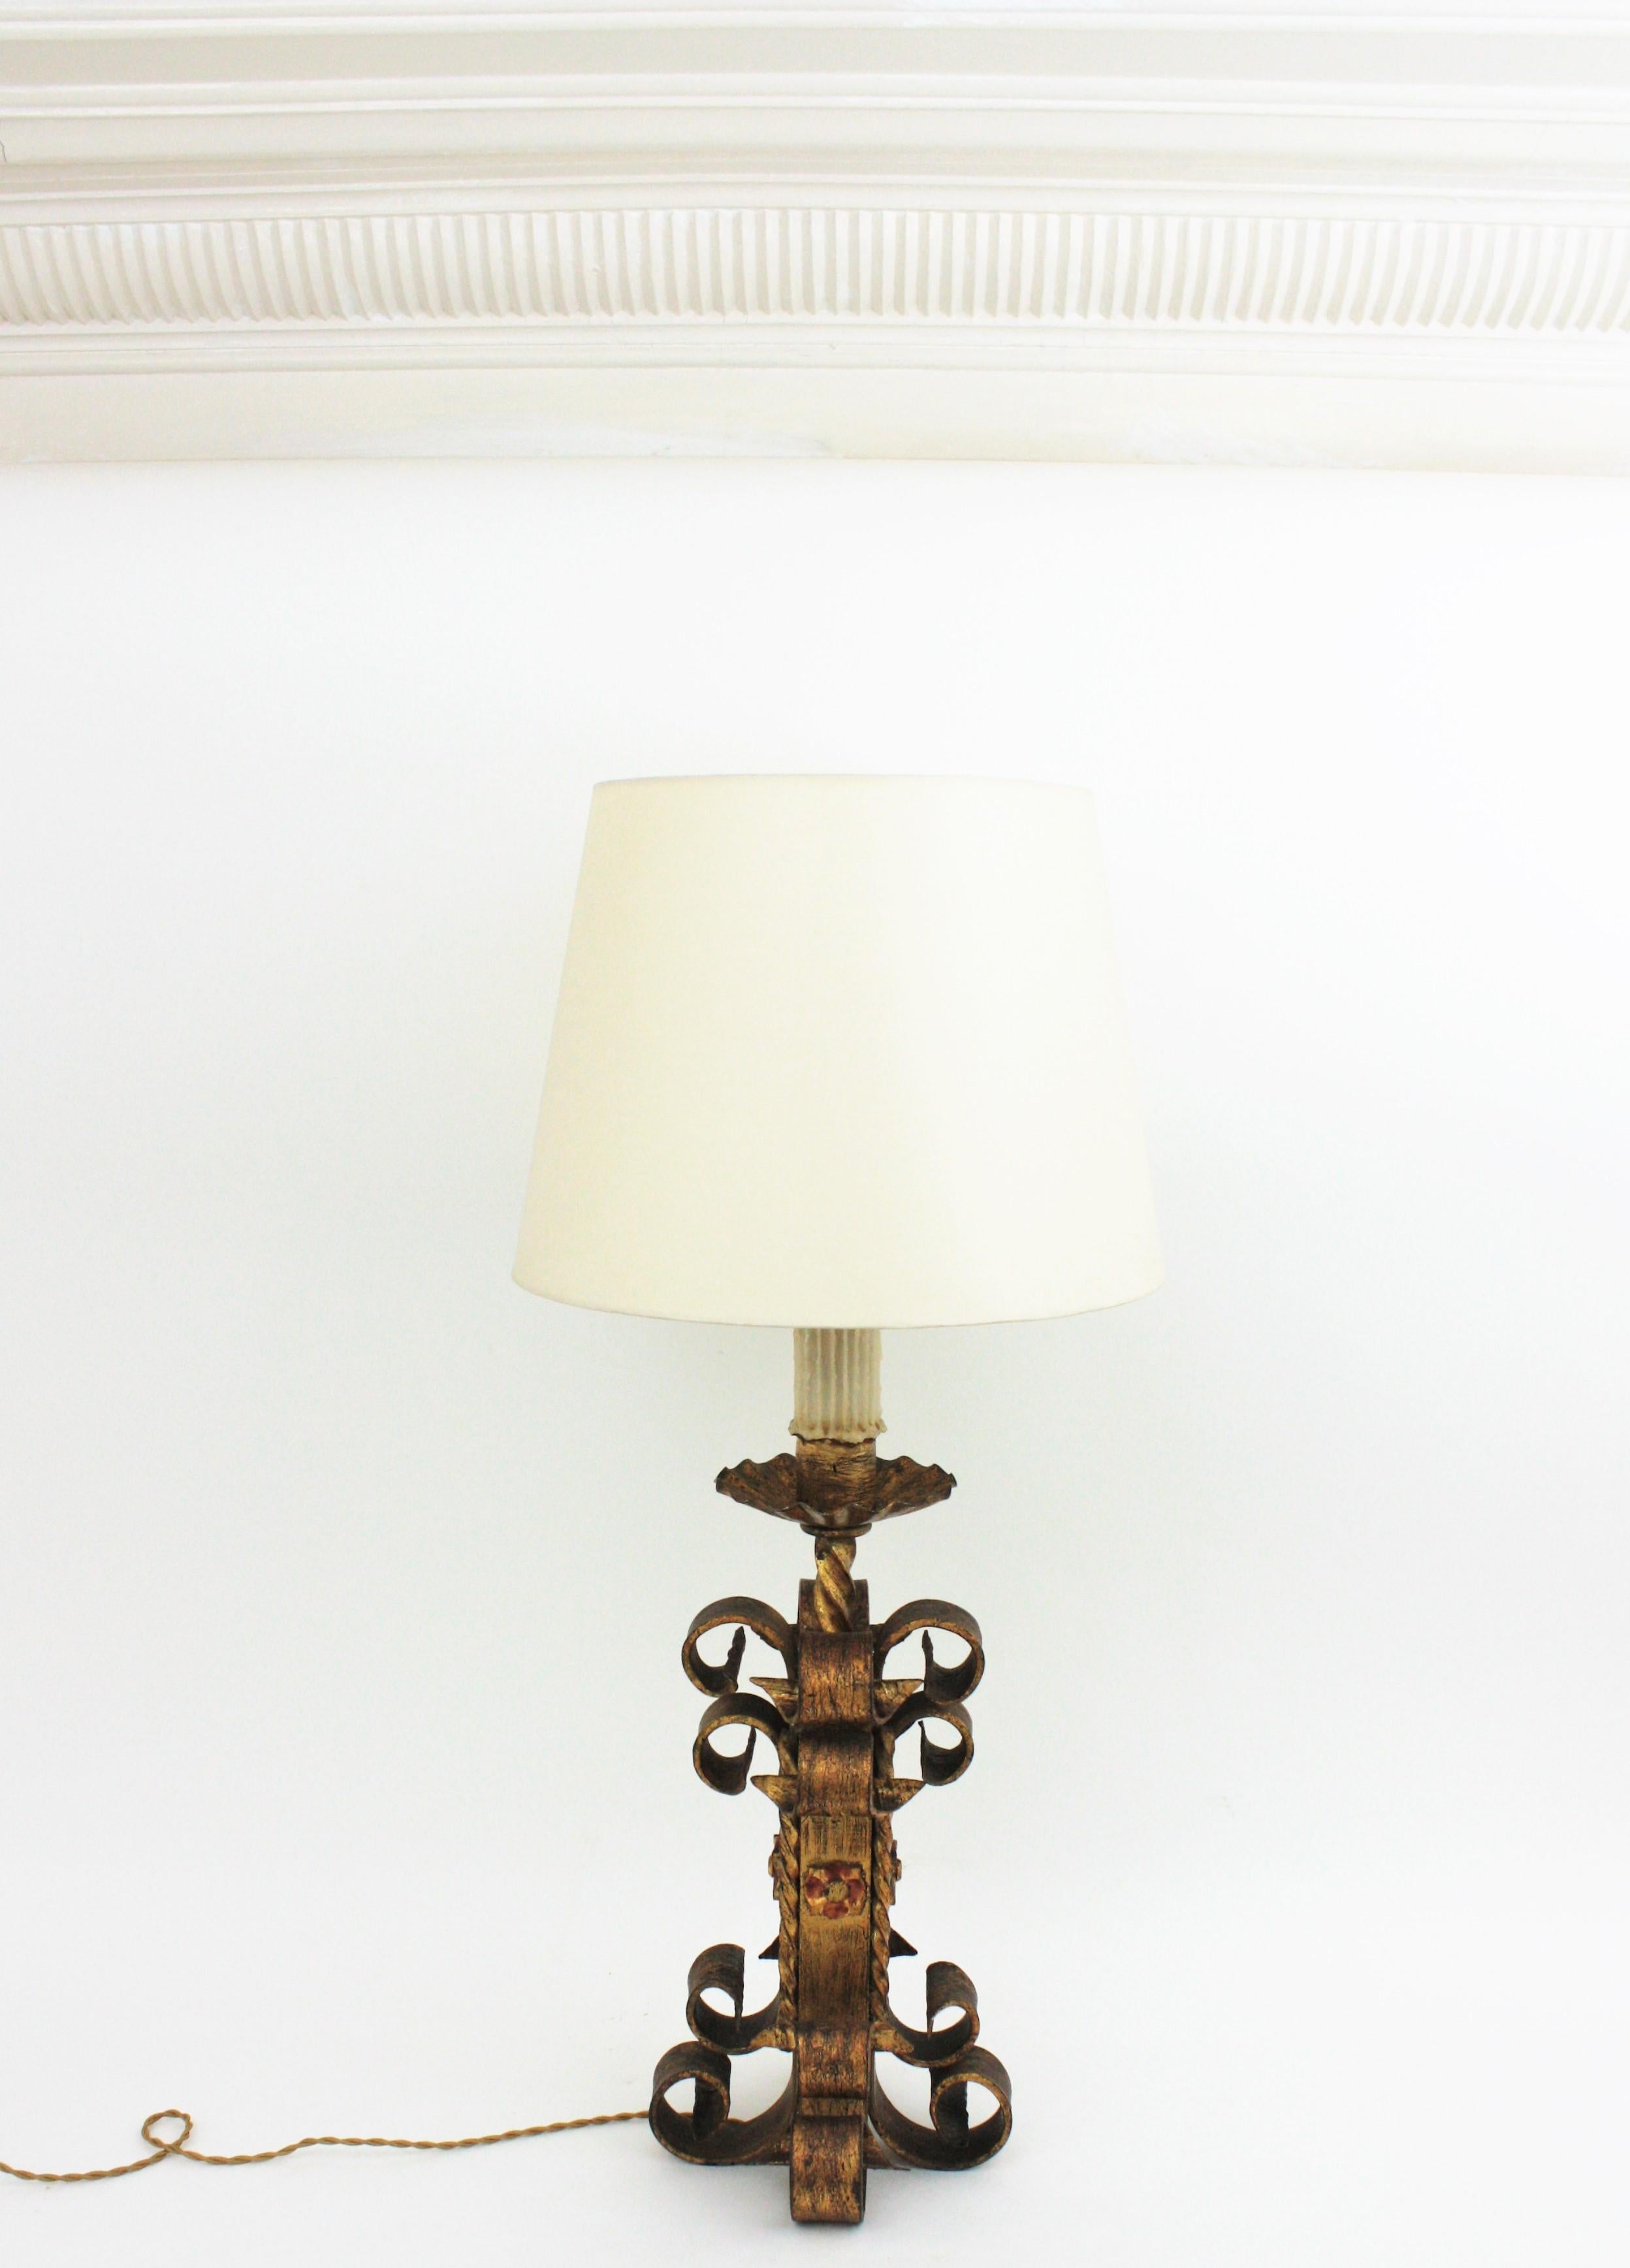 Hand-Crafted Spanish Revival Scrollwork Table Lamp in Gilt Wrought Iron, 1940s